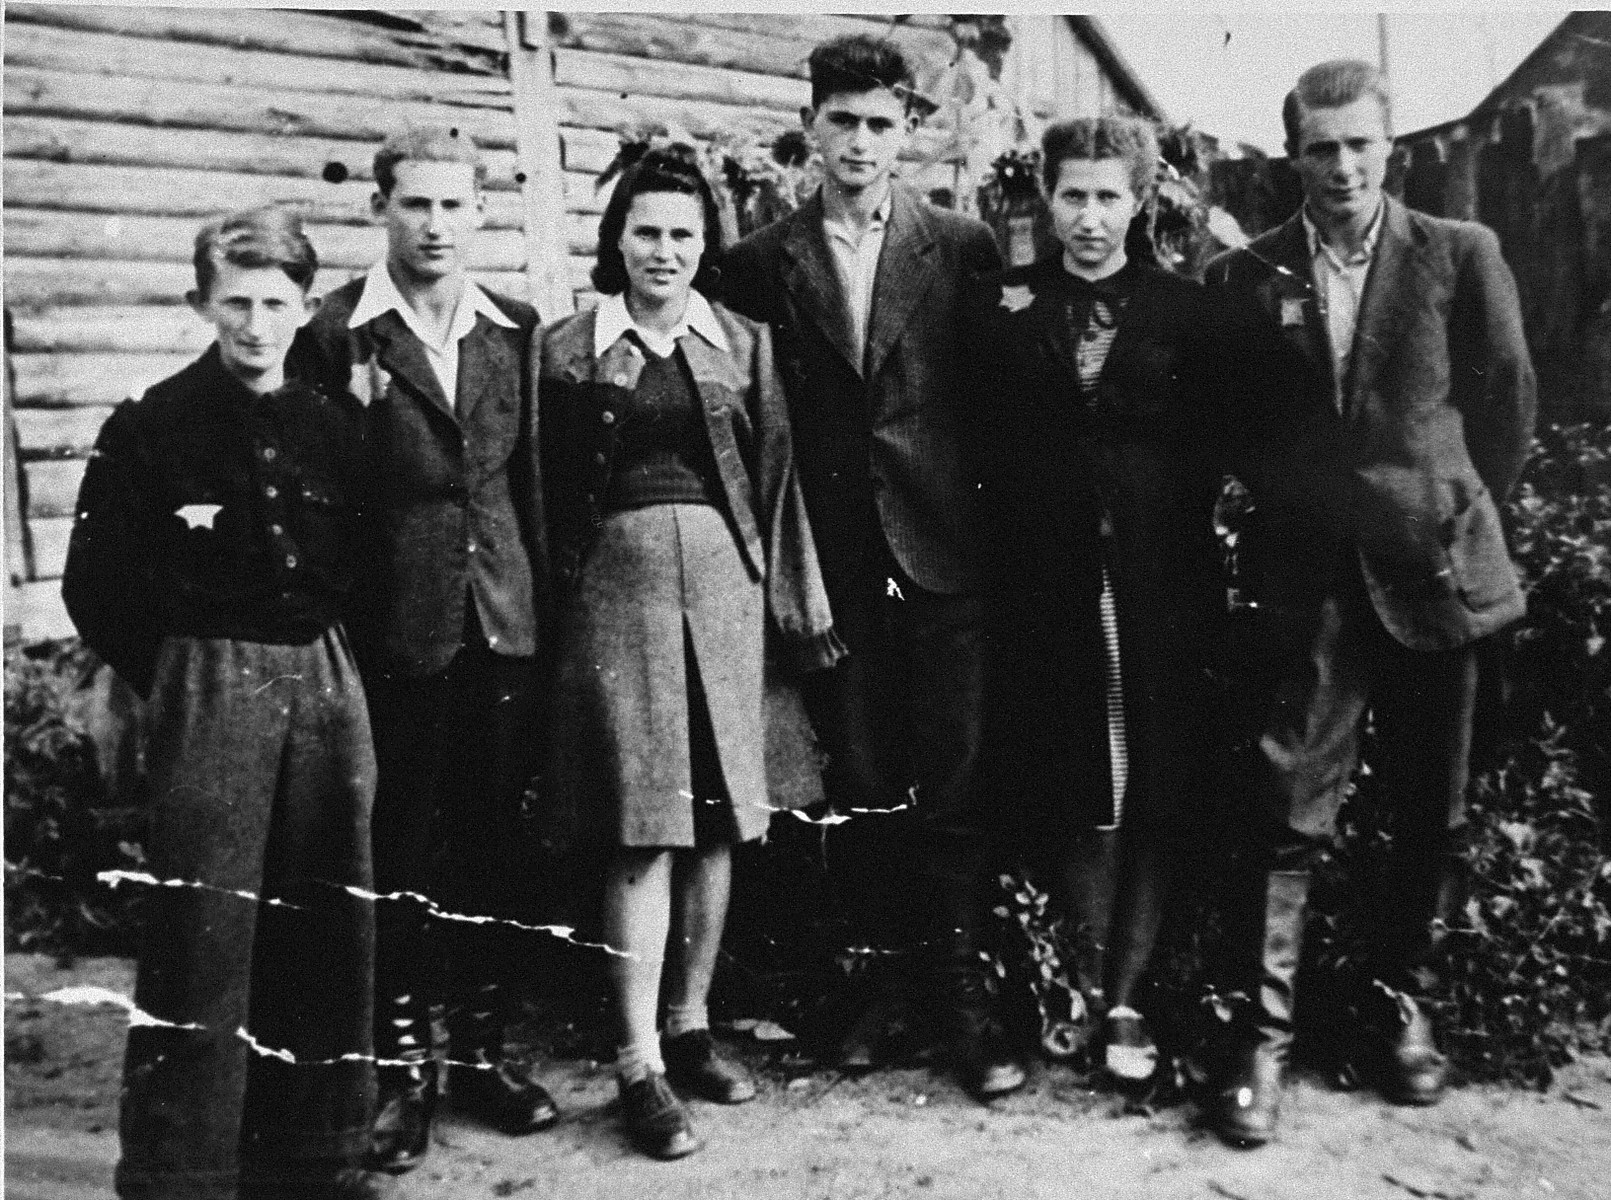 Group portrait of Jewish youth in the Kovno ghetto, who were involved in the underground.  

Pictured from left to right are:  Zalman Holtzberg, Samuel Ingel, Leah Port, David Goldin, Esther Labonowski and Israel Goldblatt.